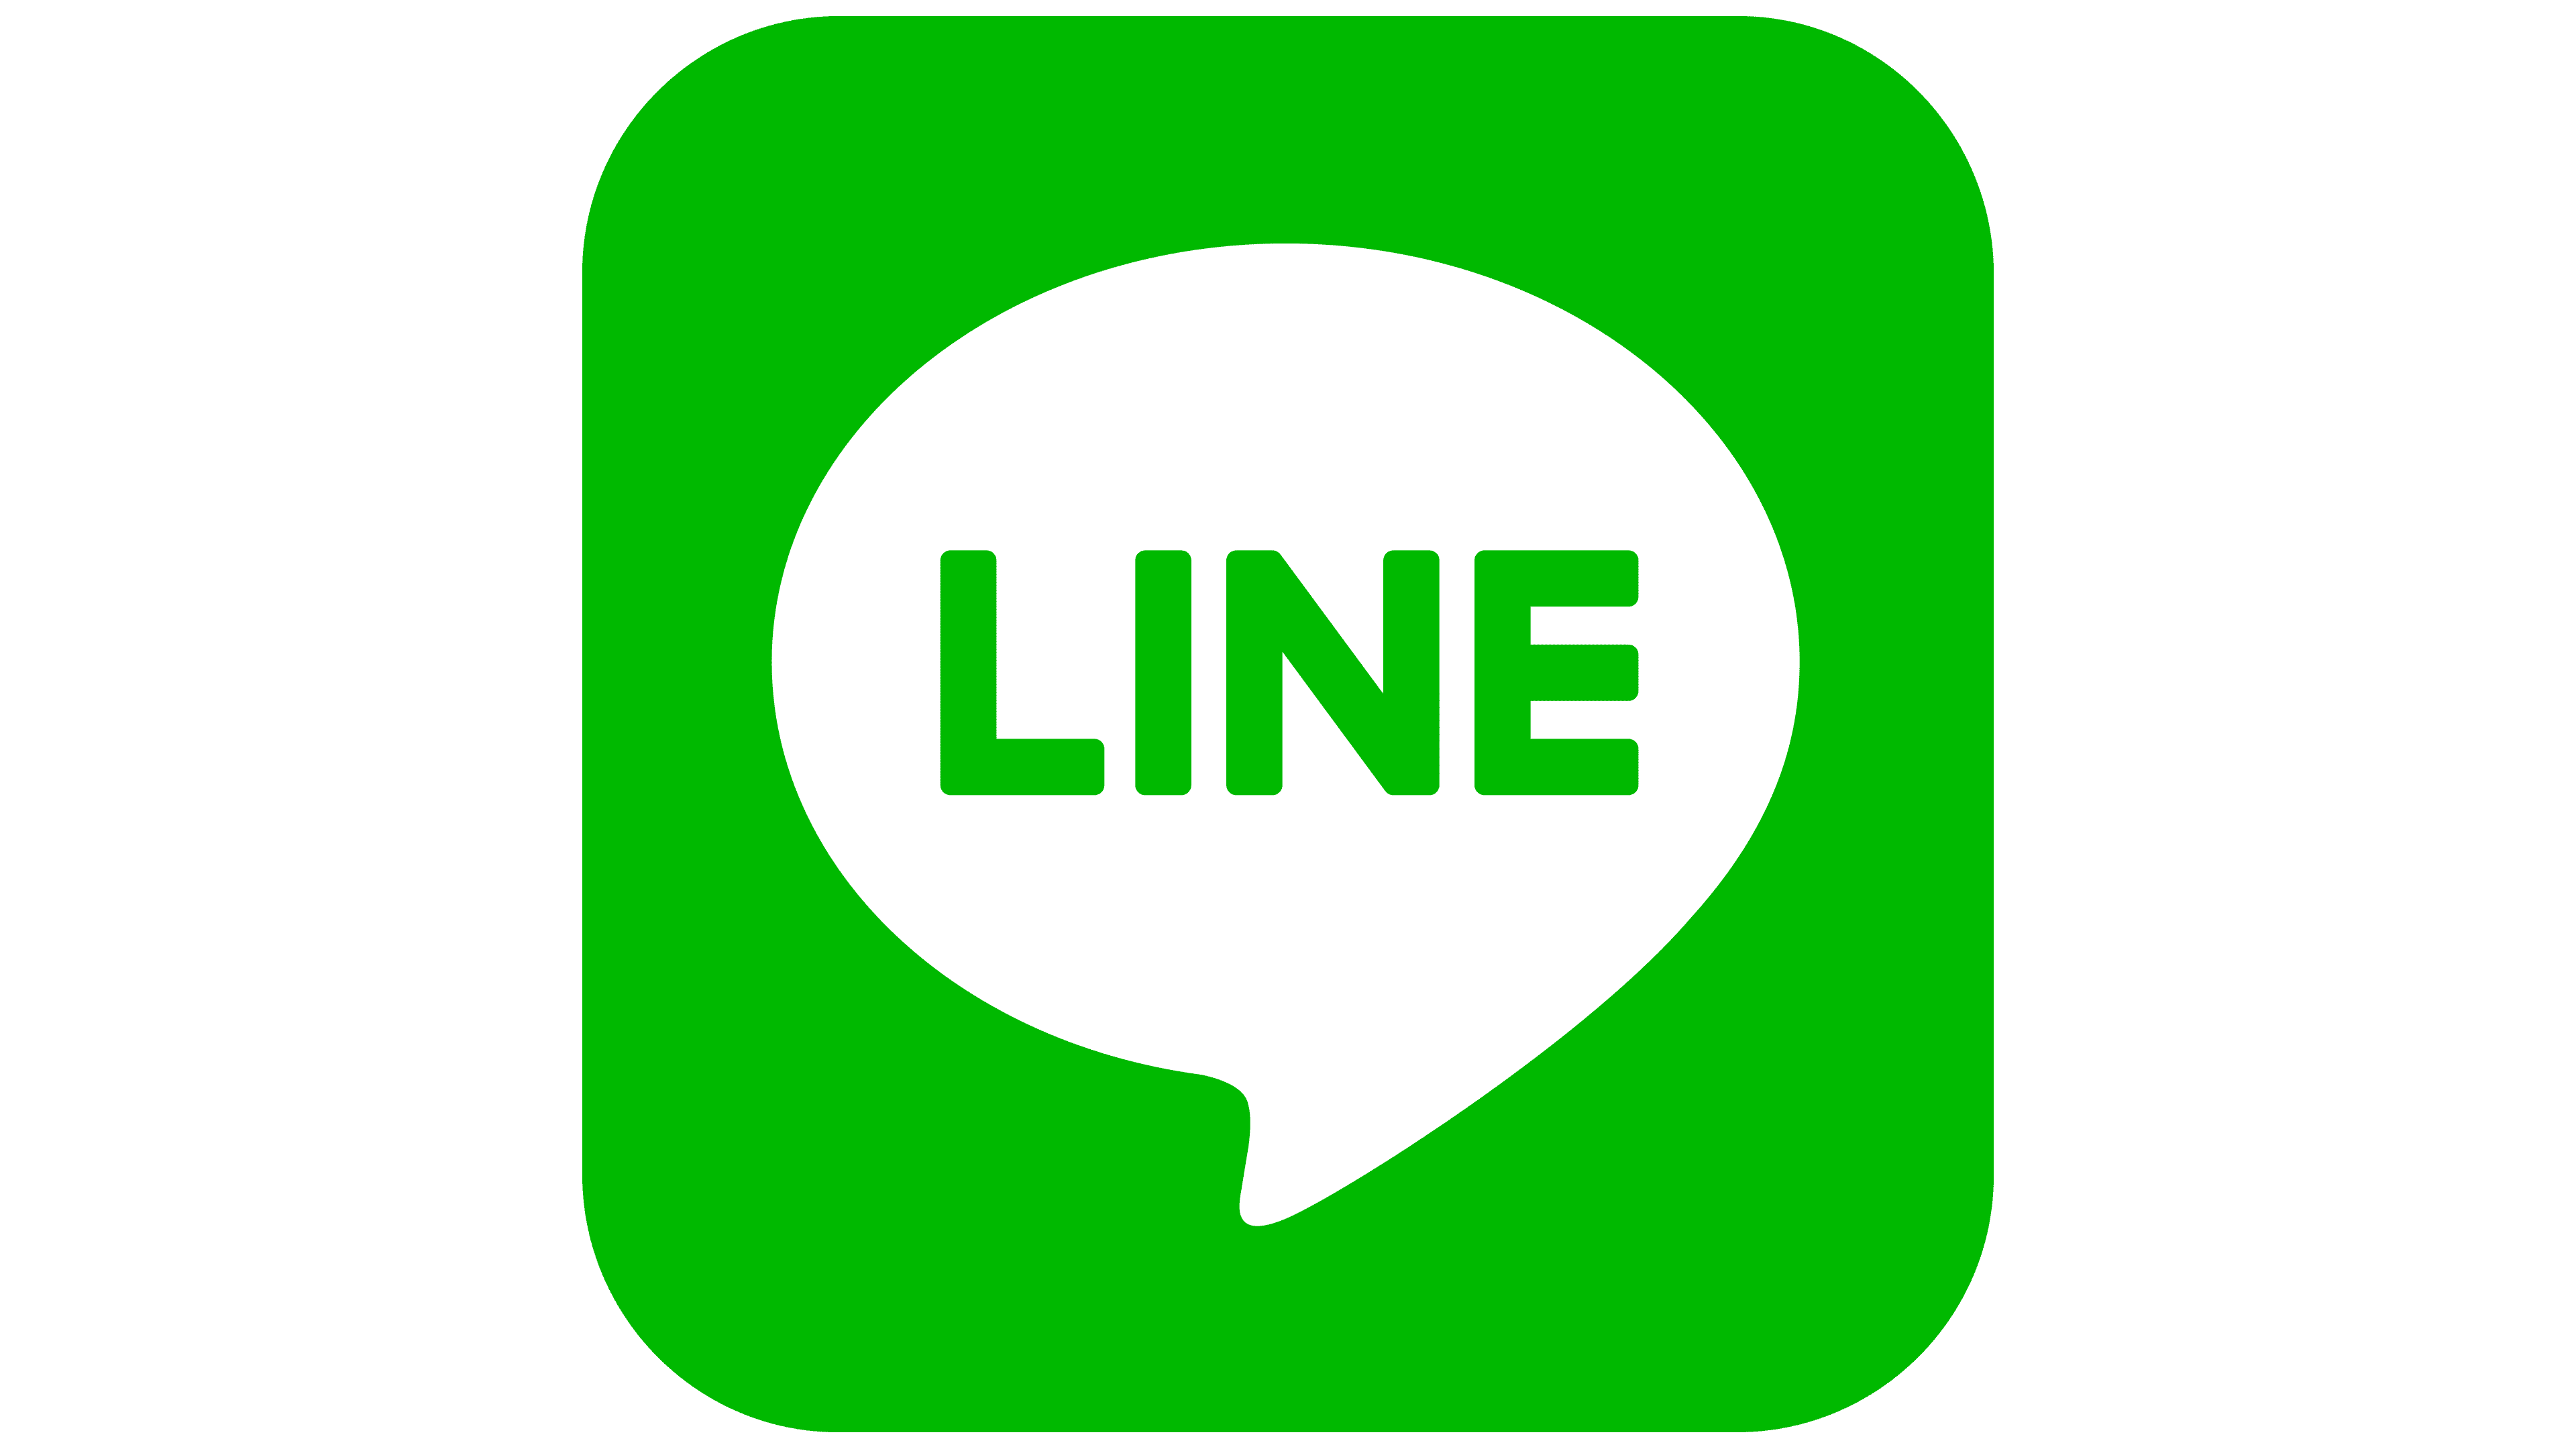 Line Logo, PNG, Symbol, History, Meaning